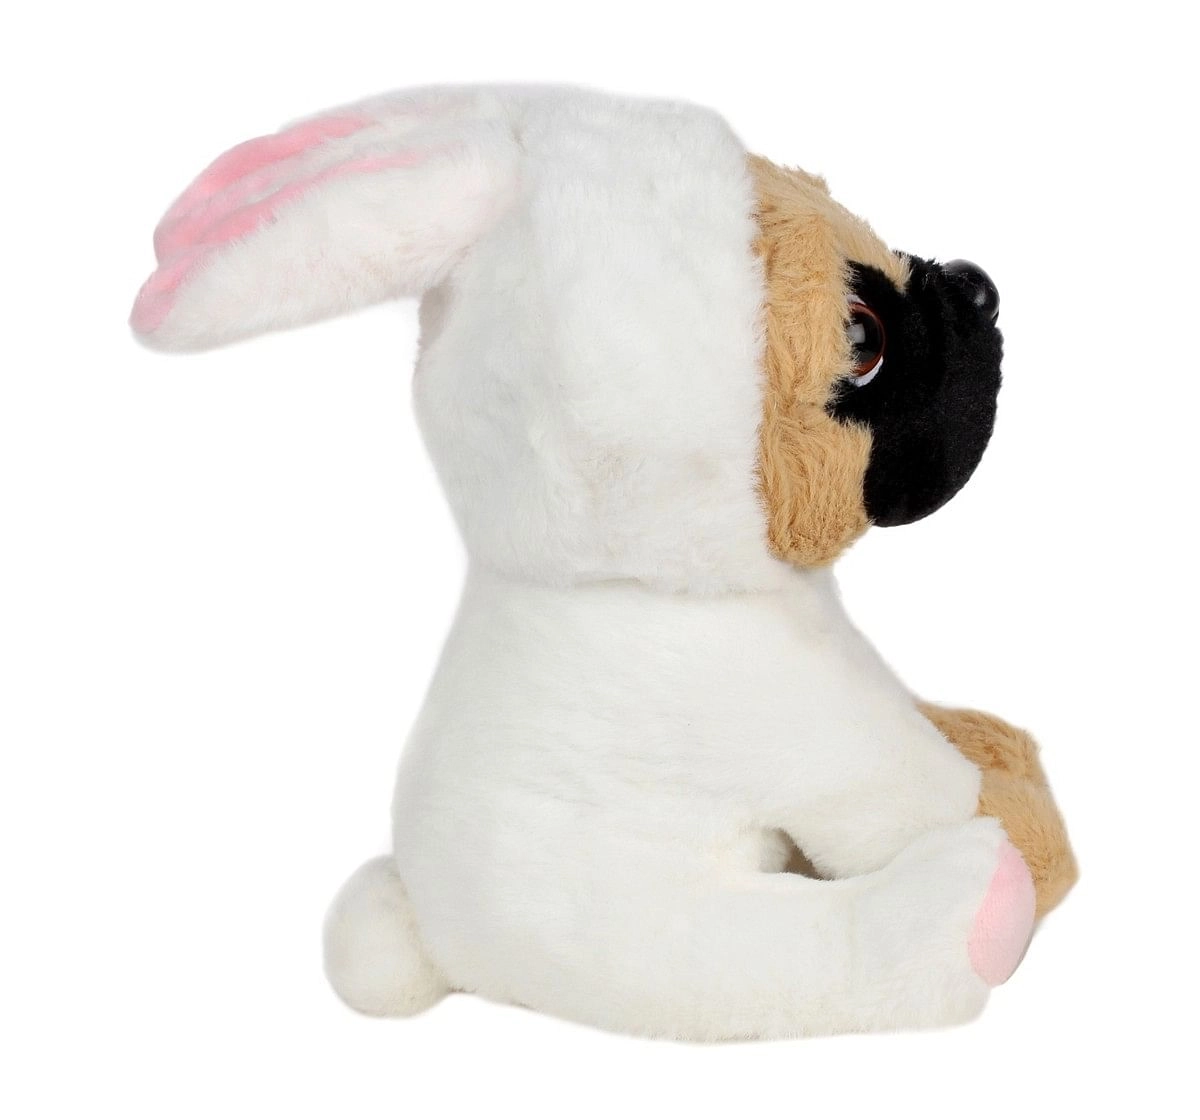 Cuddles Pug with Hood & Bunny Ears 20 Cms Plush Toy for New Born Kids age 0M+